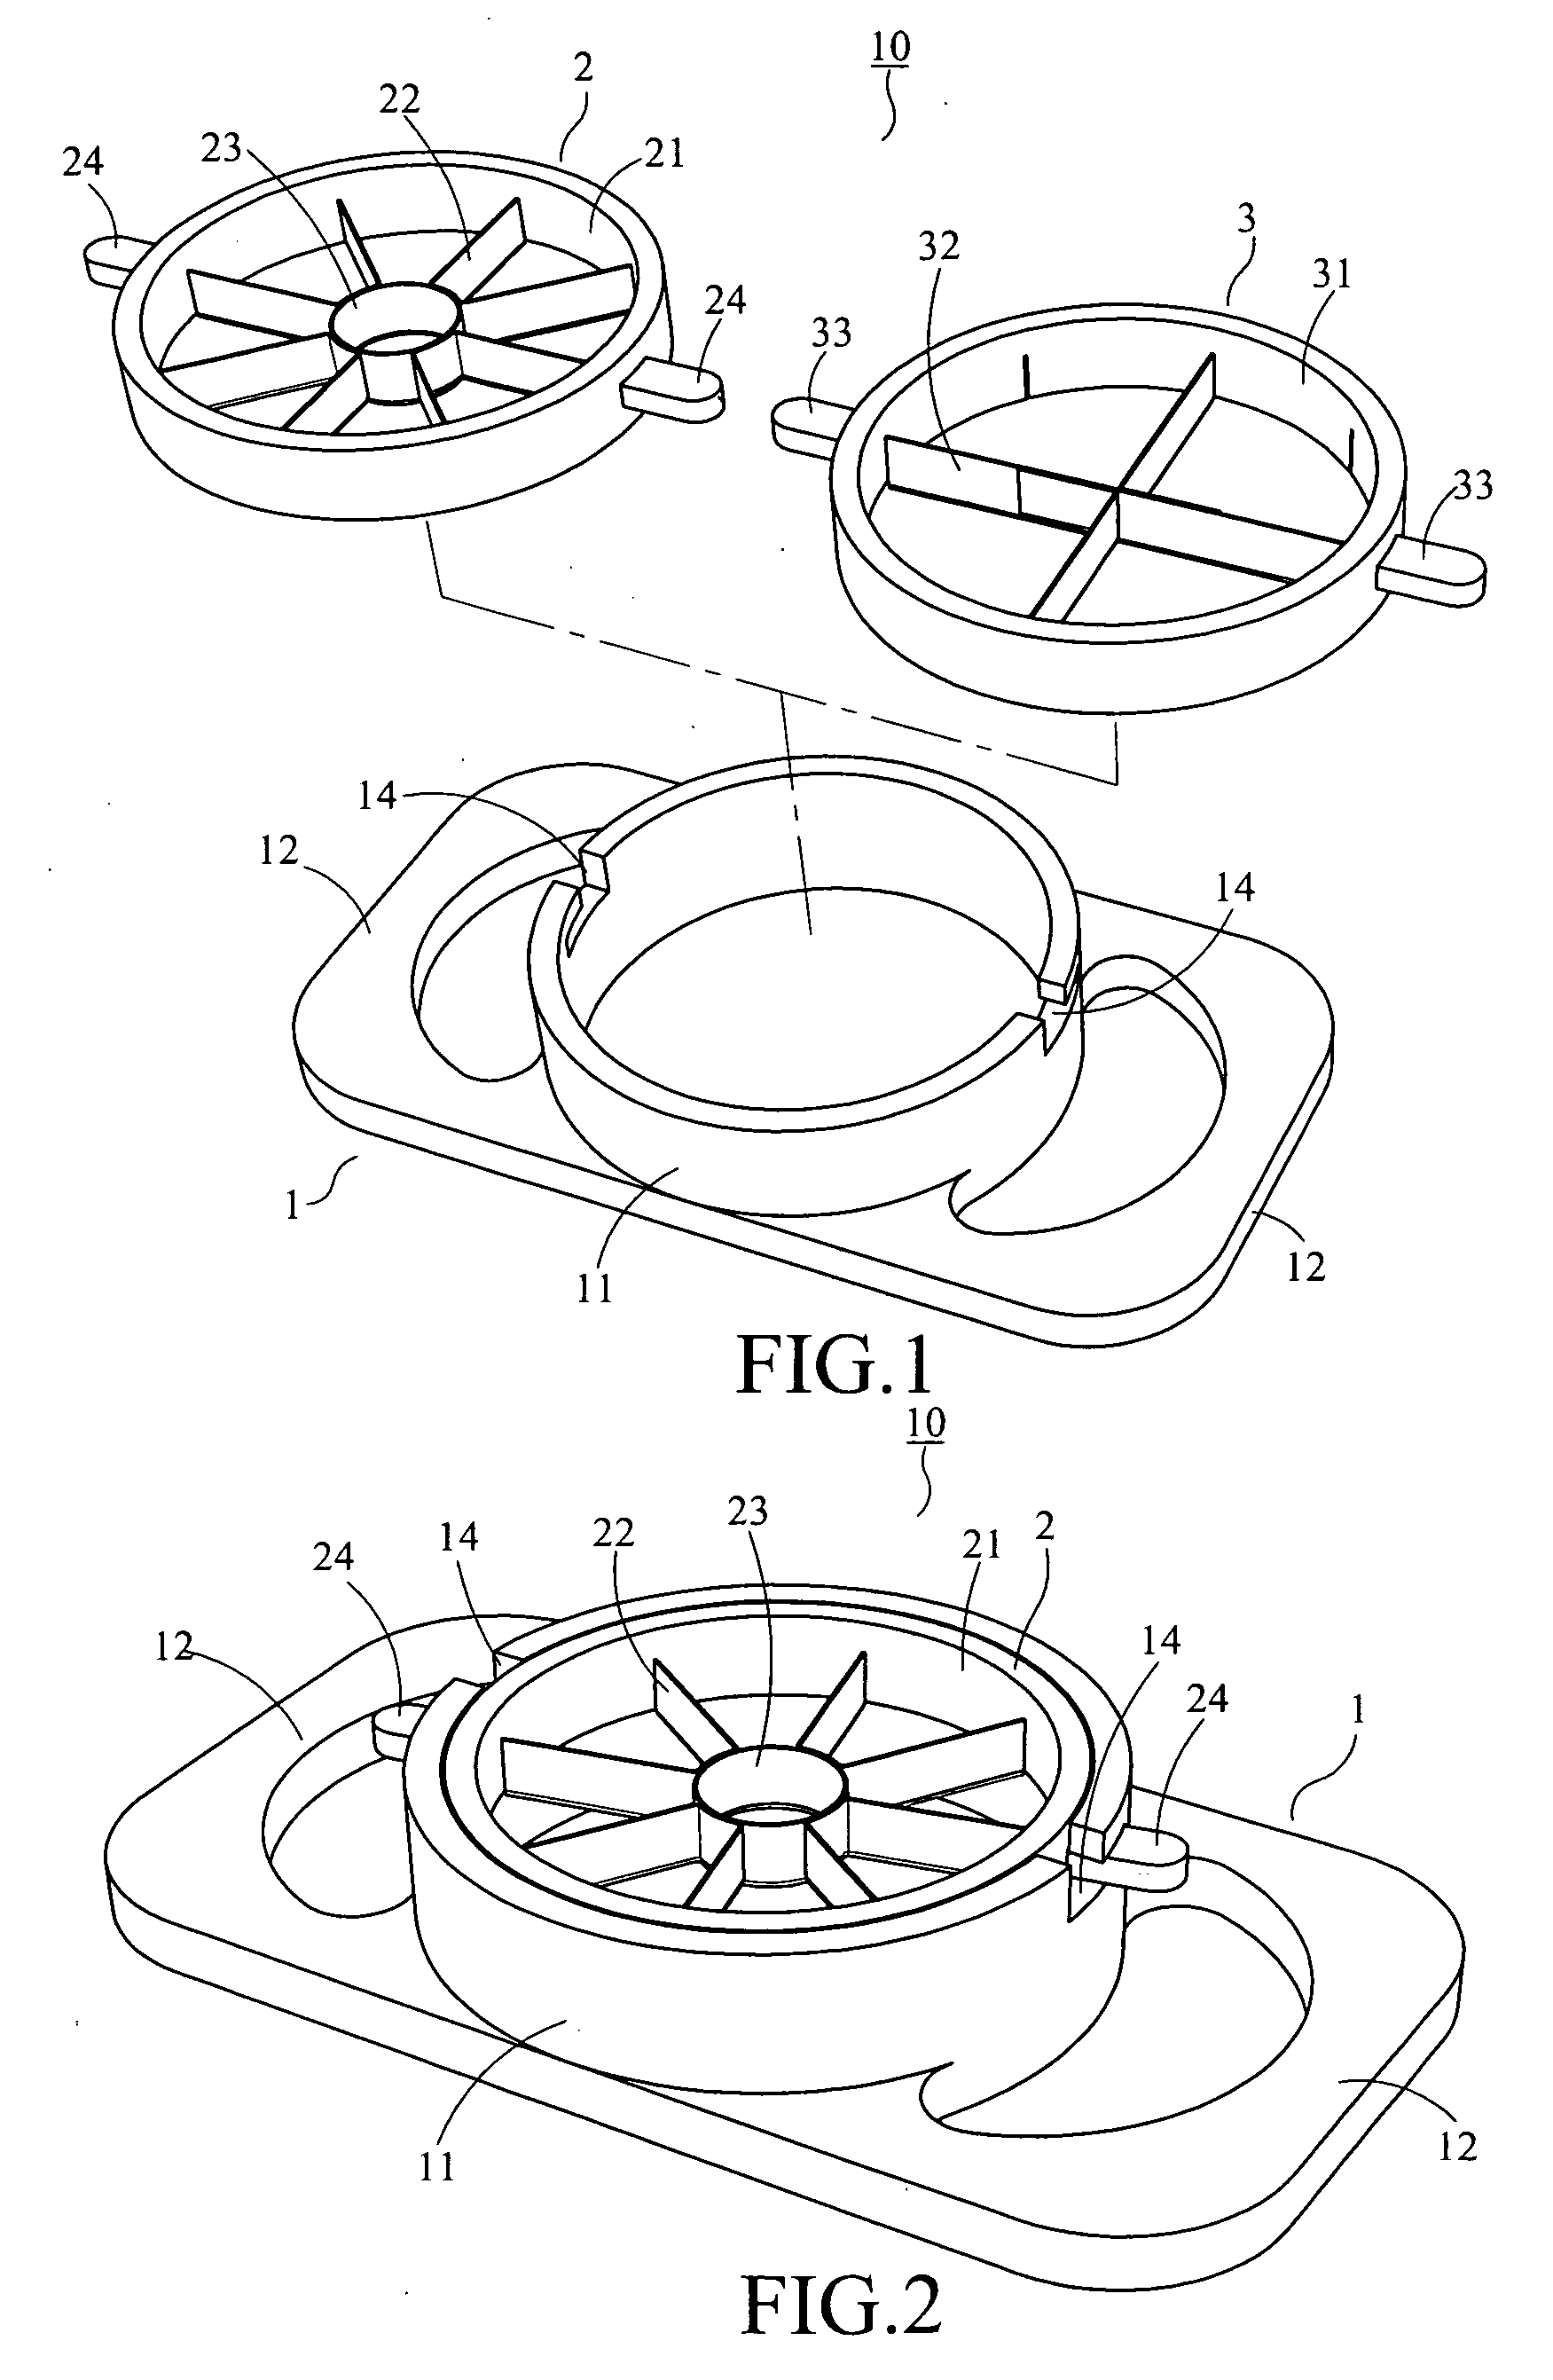 Manual fruit slicer with interchangeable cutting and coring disks